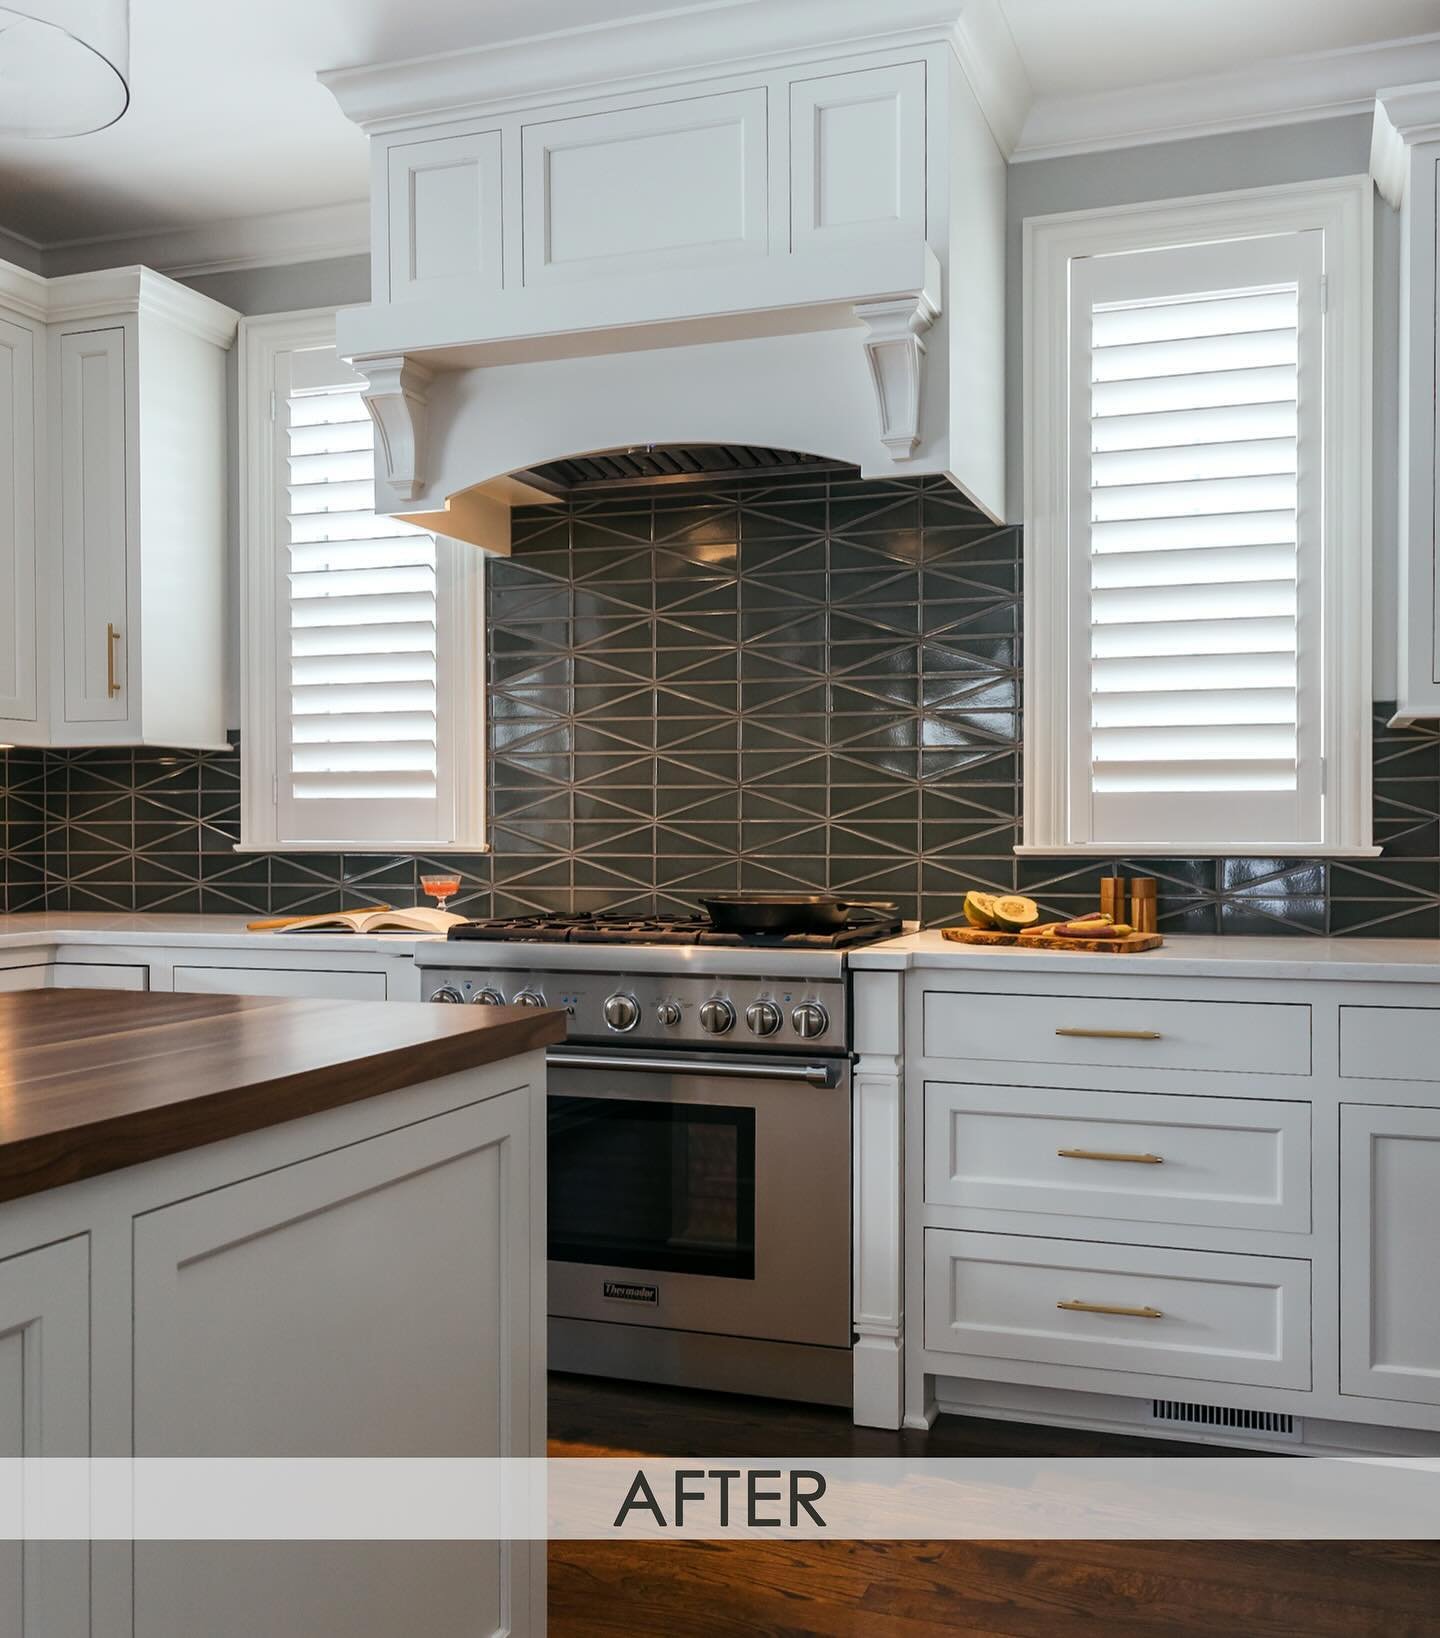 B E F O R E / A F T E R 

Swipe to the &lsquo;before&rsquo; of our &lsquo;Sweater Weather&rsquo; kitchen refresh. Along with redesigning the whole first floor and primary suite, we updated the kitchen from builder basic by changing out the tile, upda